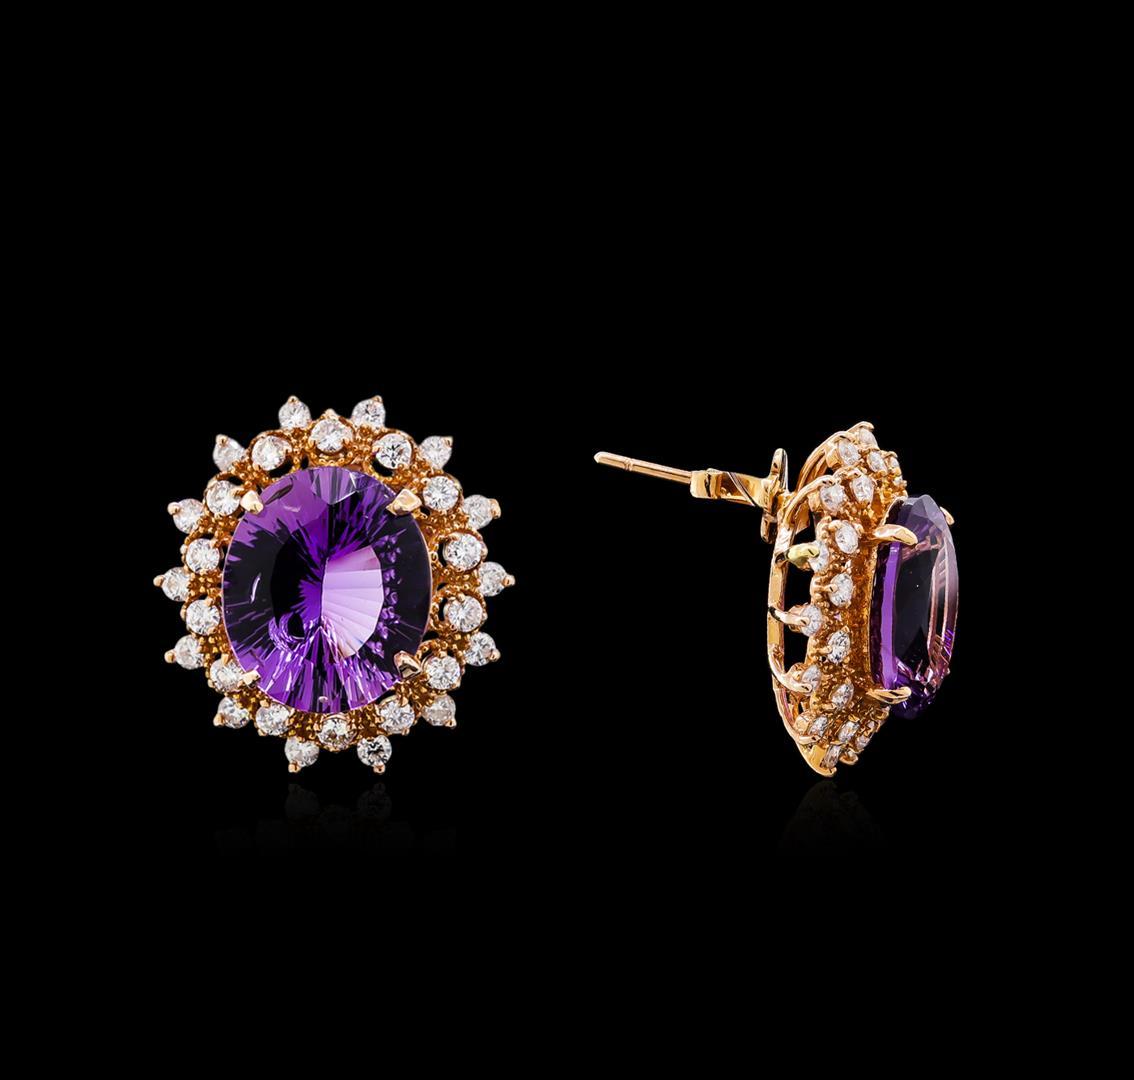 12.00 ctw Amethyst and Diamond Earrings - 14KT Rose Gold